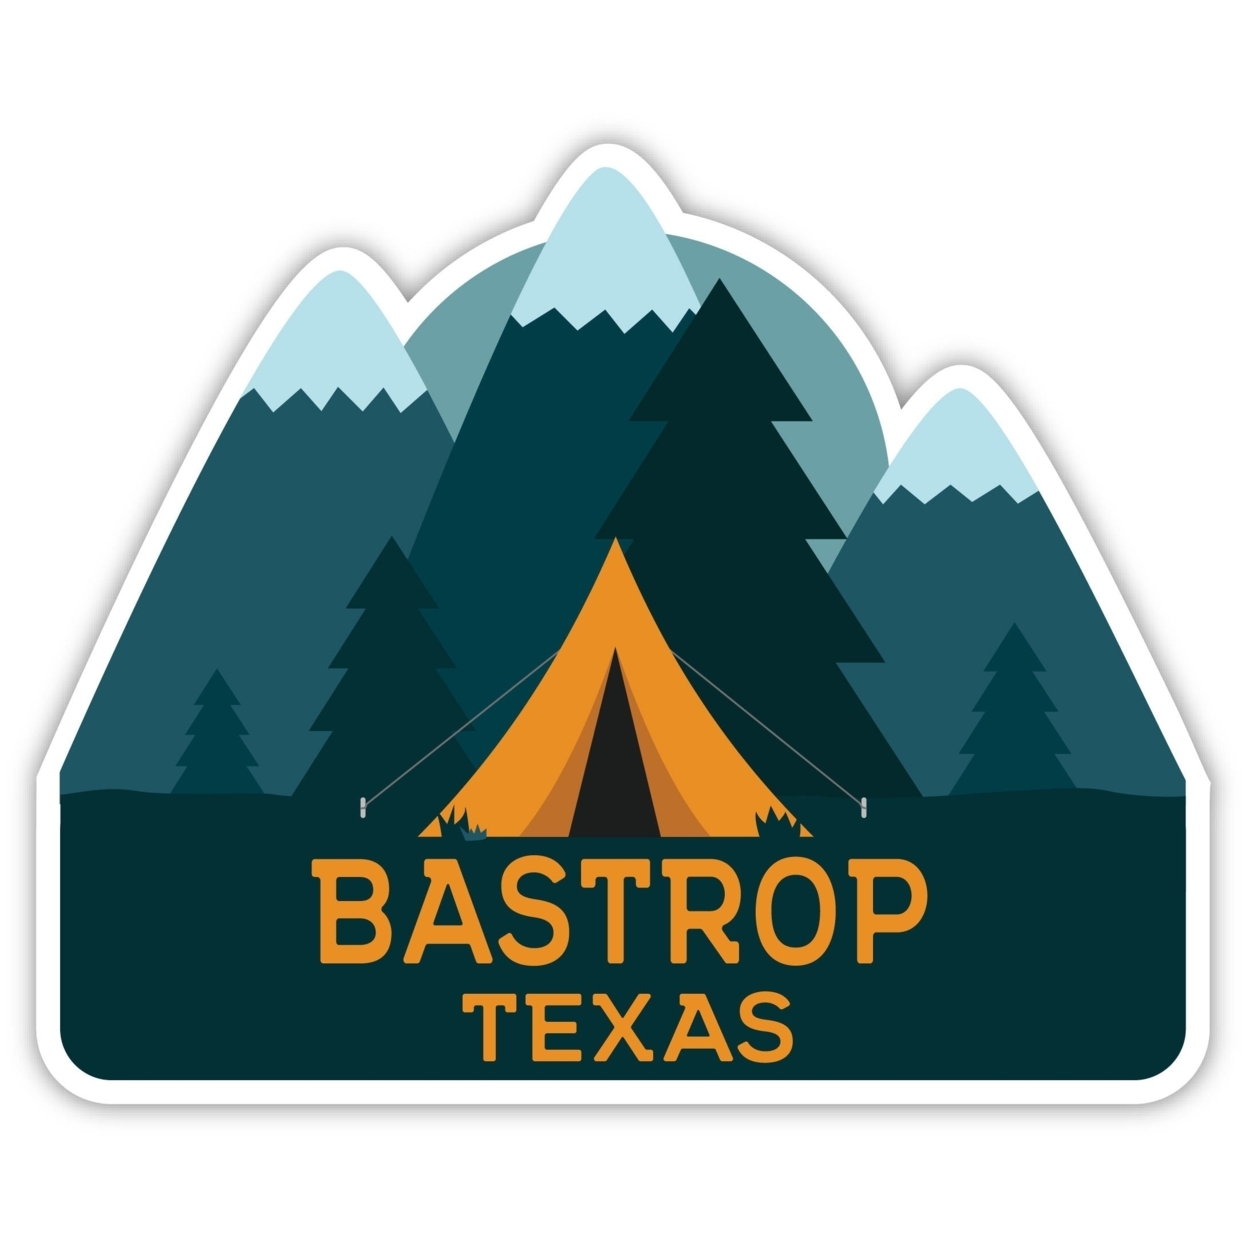 Bastrop Texas Souvenir Decorative Stickers (Choose Theme And Size) - 4-Pack, 2-Inch, Camp Life